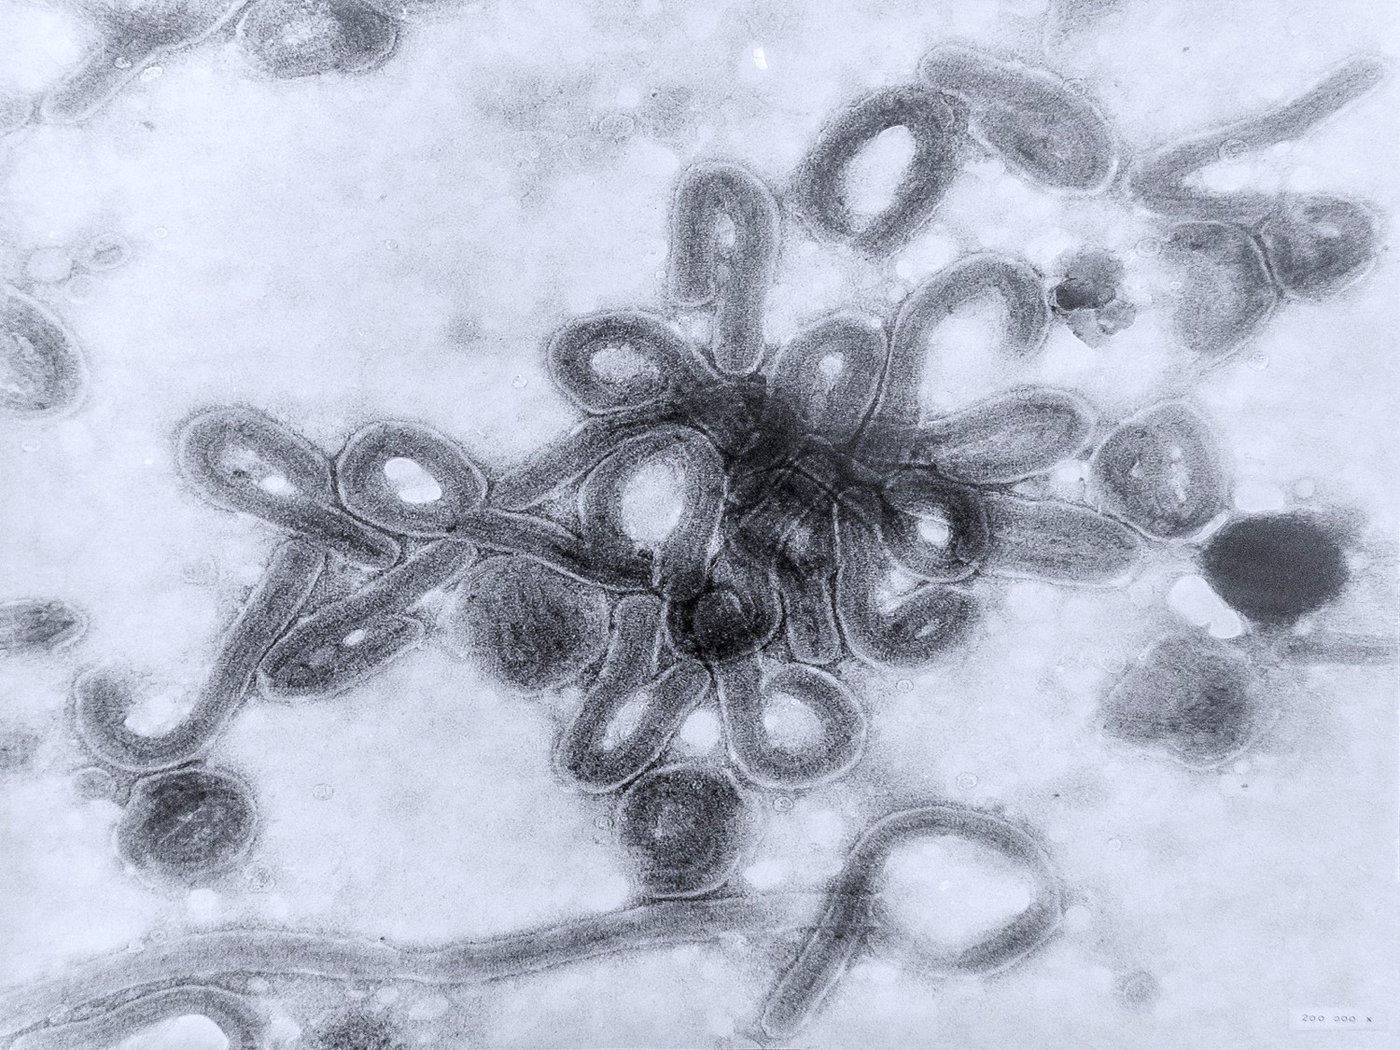 Microscopic image of the Marburg virus: a black and white image of the Marburg virus. In the centre, a cluster of short, worm-like viruses that often bend at one end